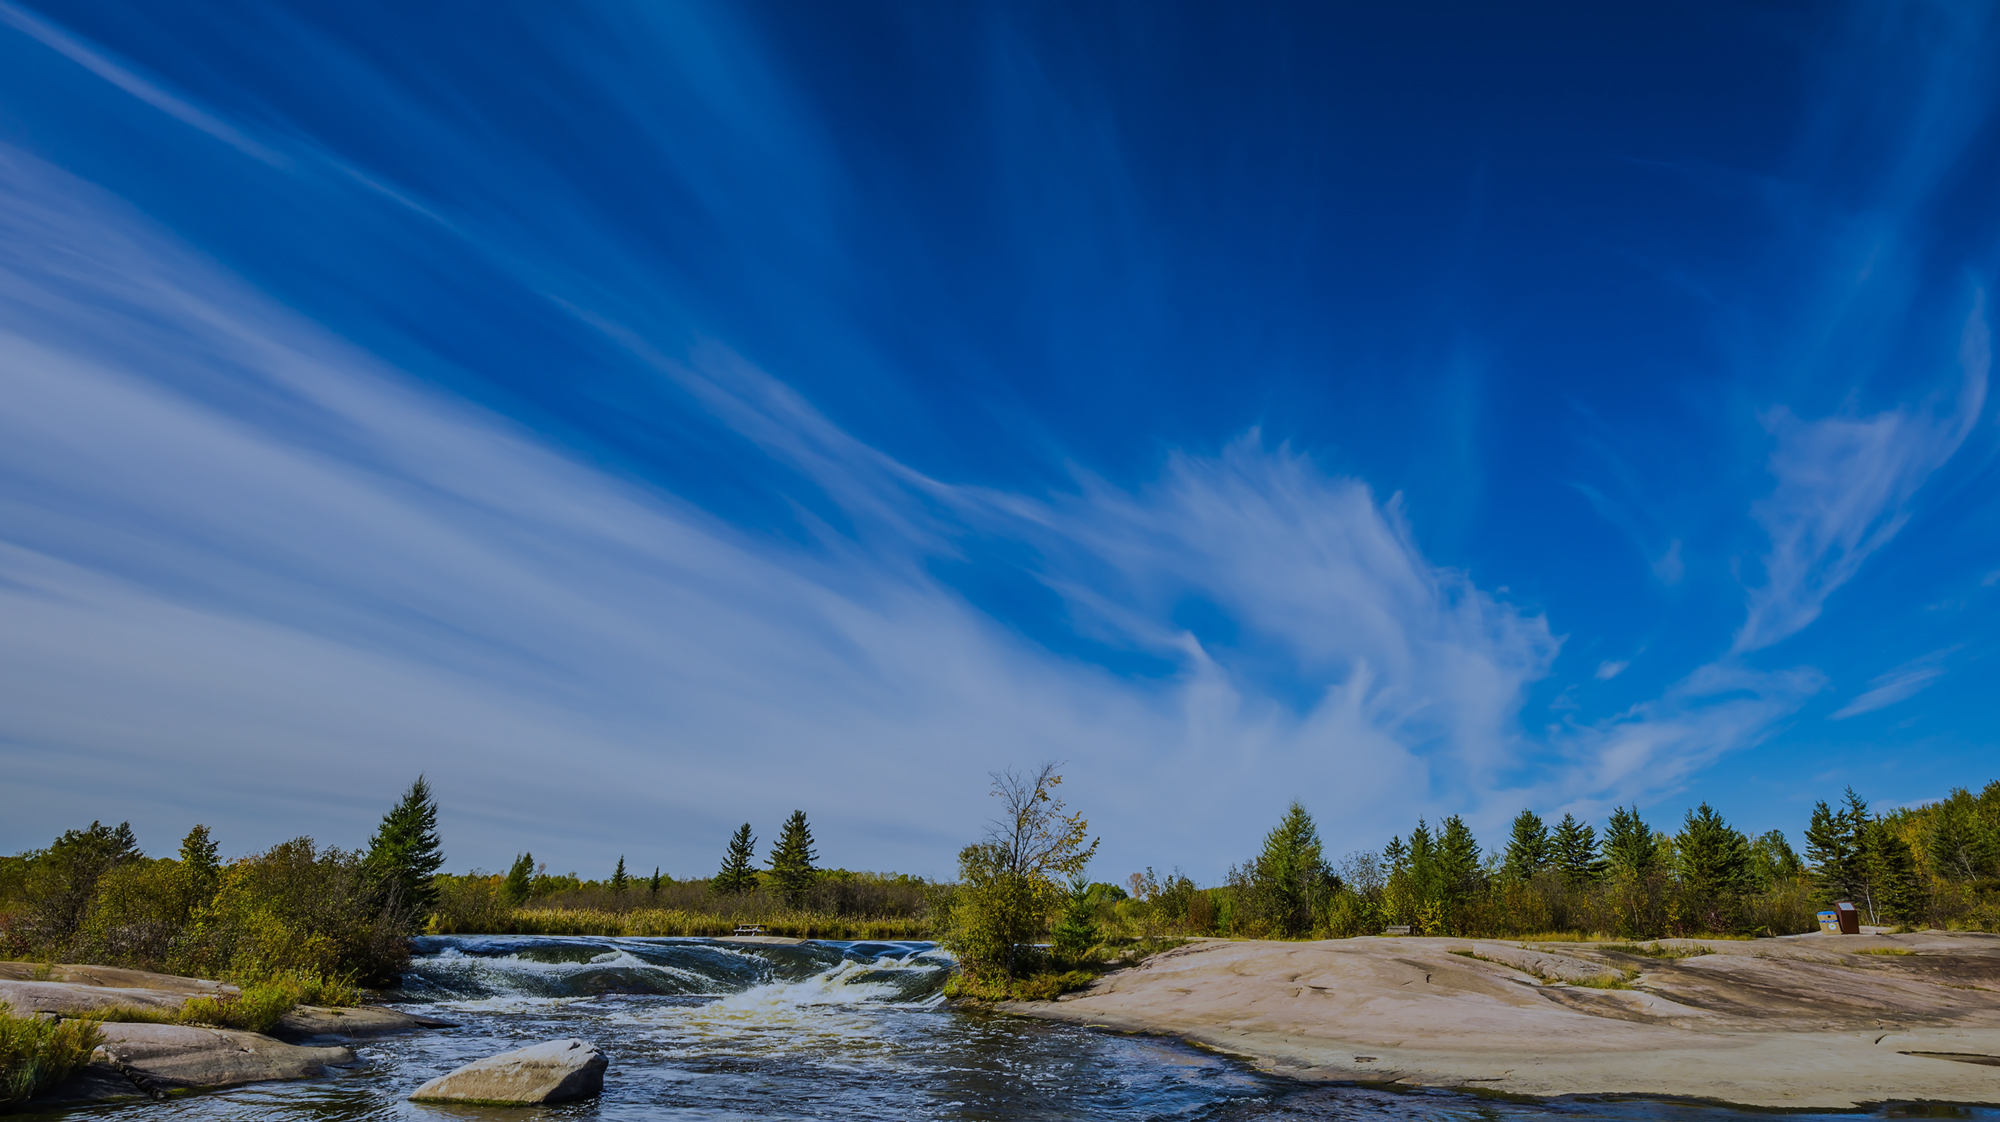 Featured Image For “Trails Manitoba”